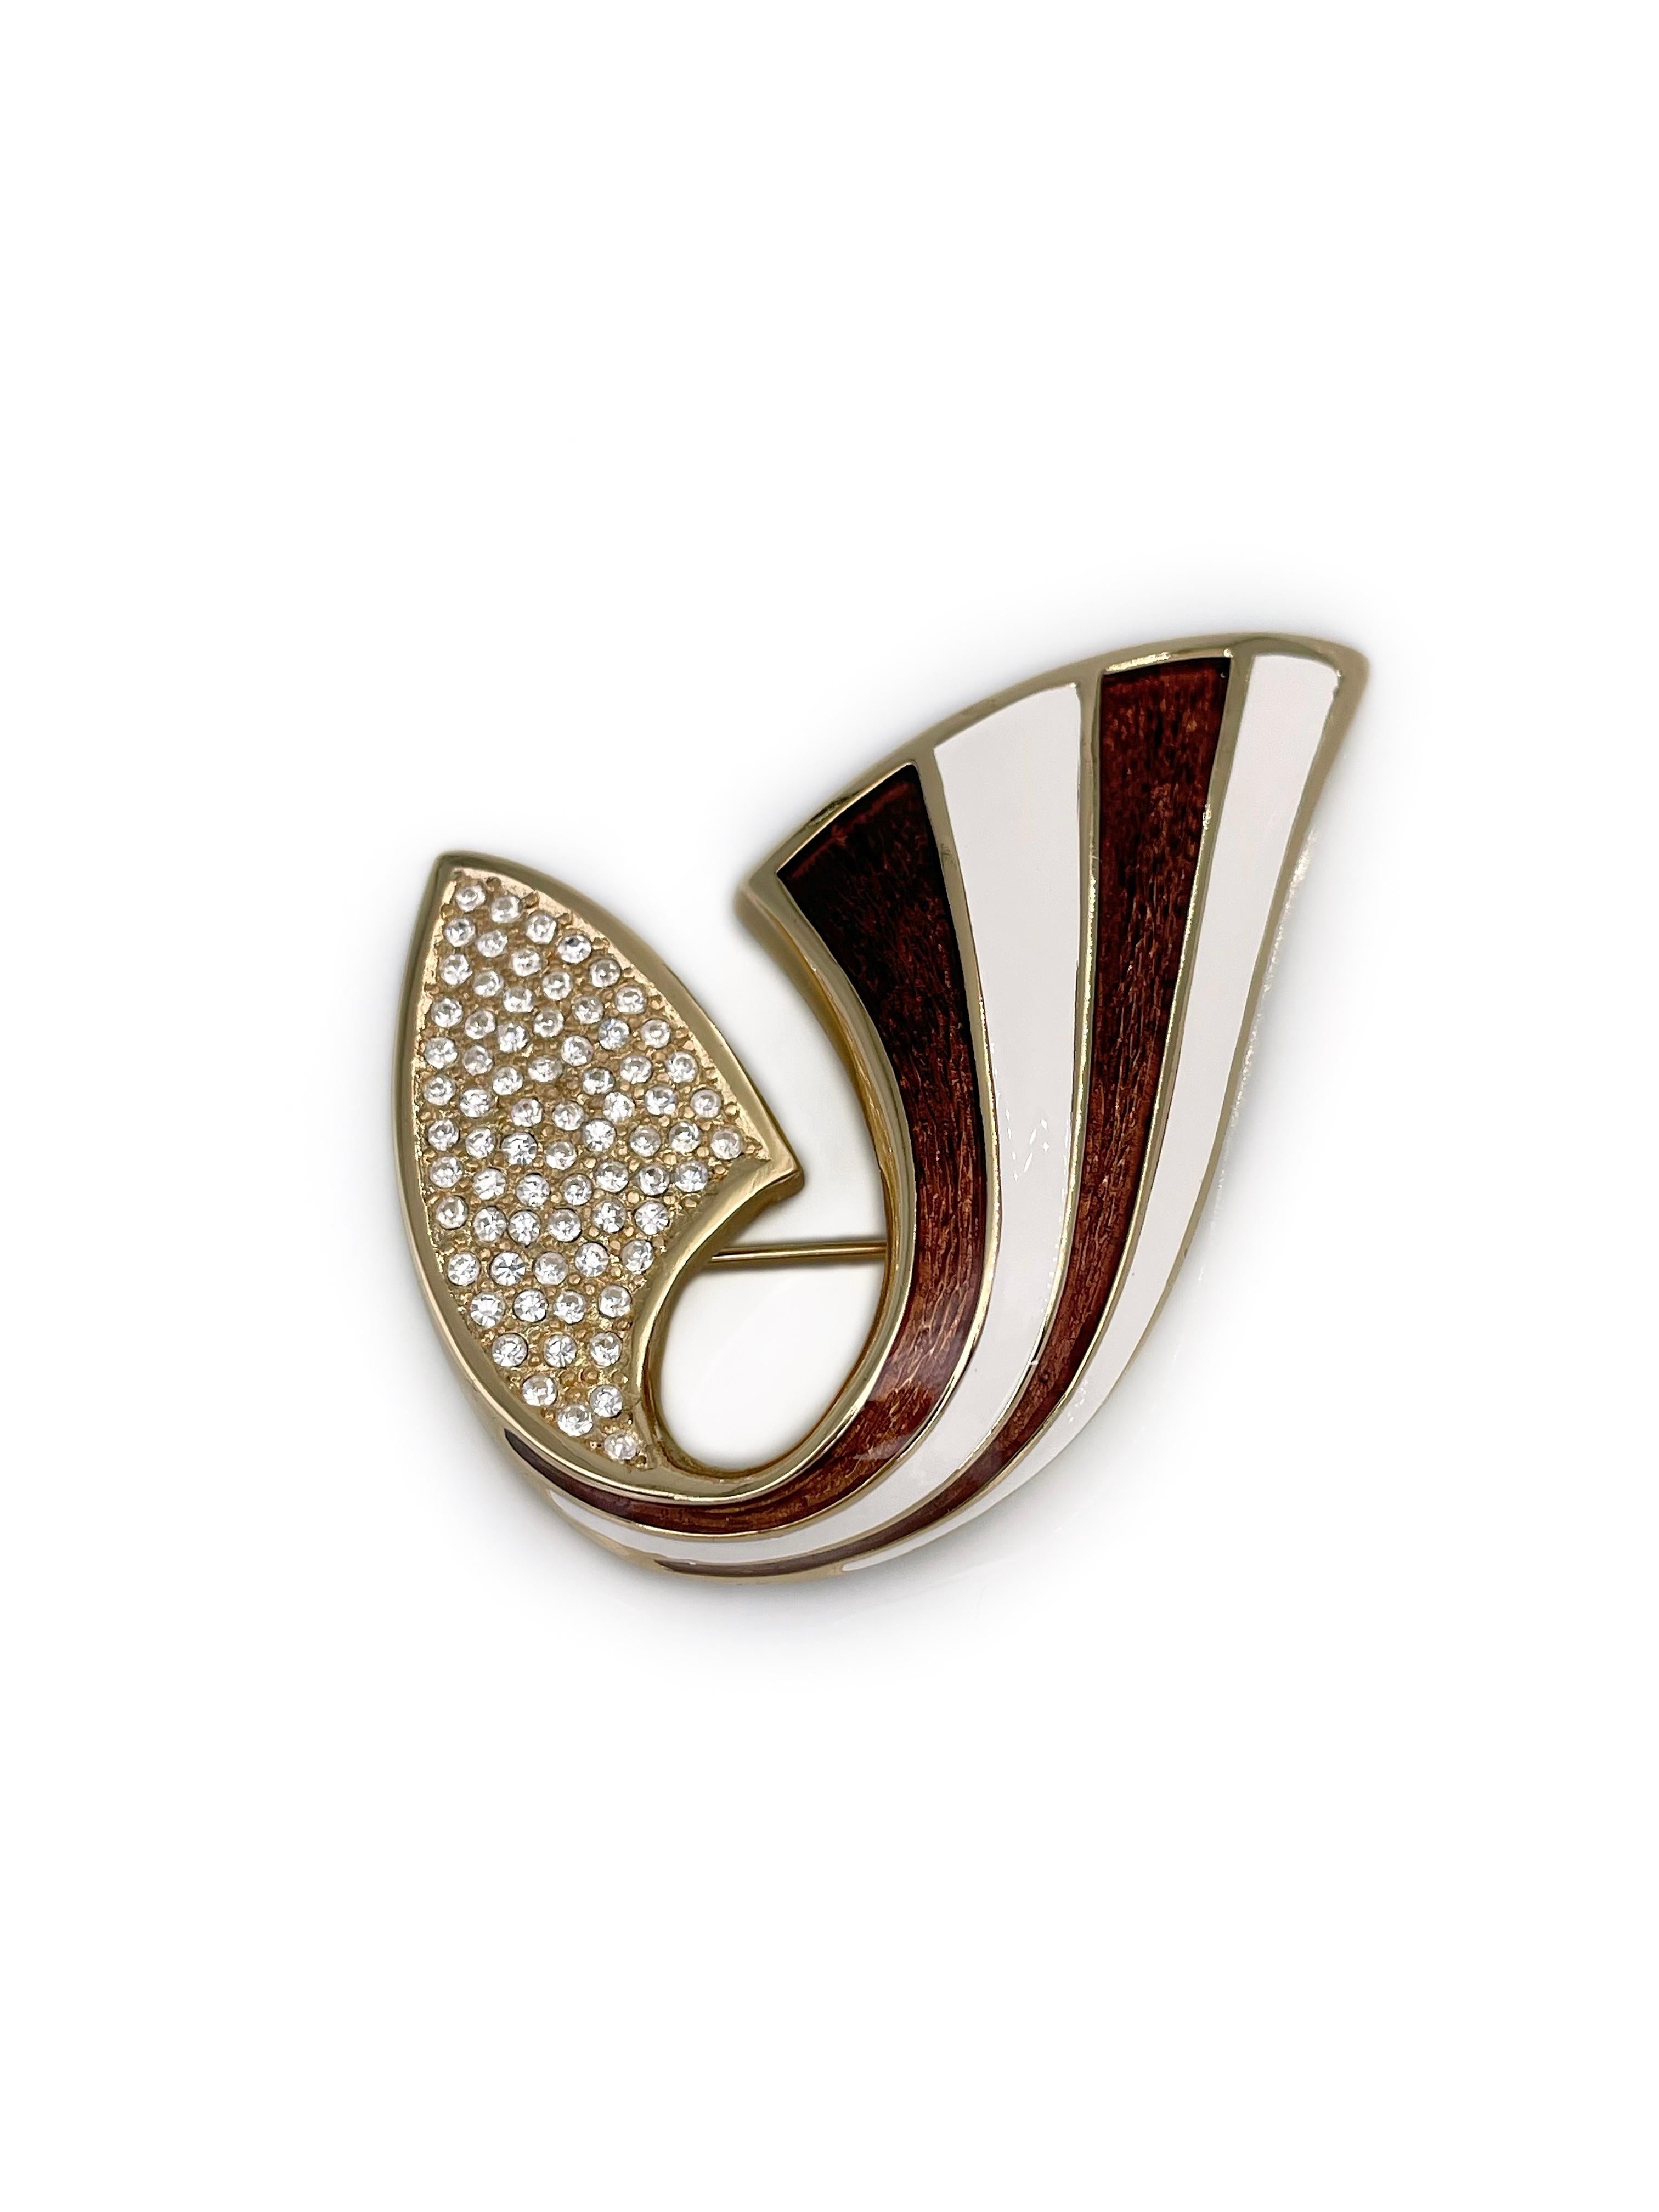 This is a vintage stylised ribbon brooch designed by Christian Dior in 1980’s. The piece is gold plated. It features clear rhinestones. The brooch is adorned with brown and white enamel.

Markings: “Chr. Dior©” (shown in photos).

Size: